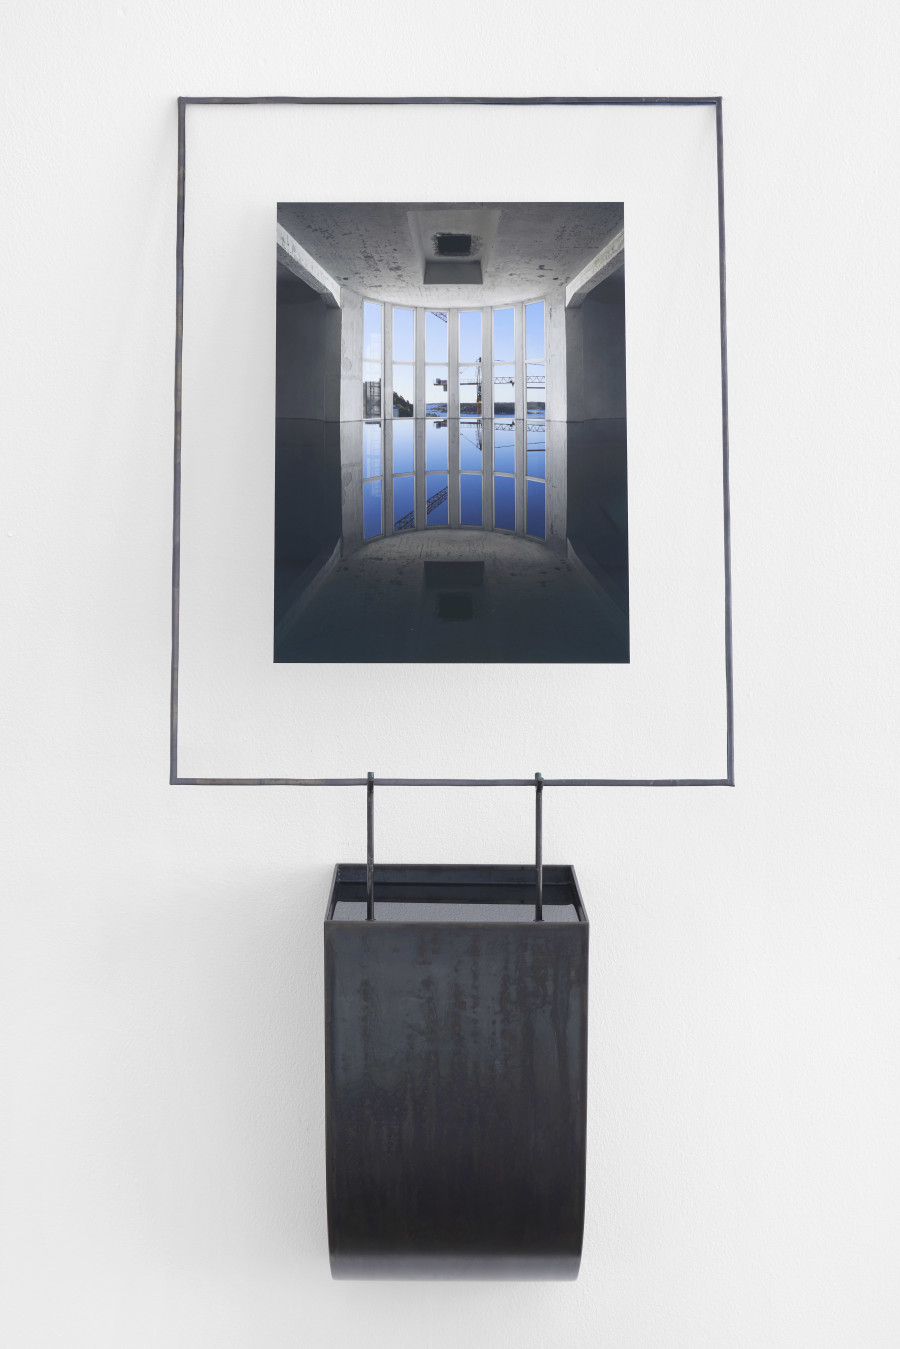 Kunstsilo (Kristiansand), 2023, Giclée print on cotton paper with Laed frame, iron structure, artist’s oil-based mix, 133 x 50 x 20 cm, Unique. Photo: Philipp Hänger. Courtesy the artist and Wilde